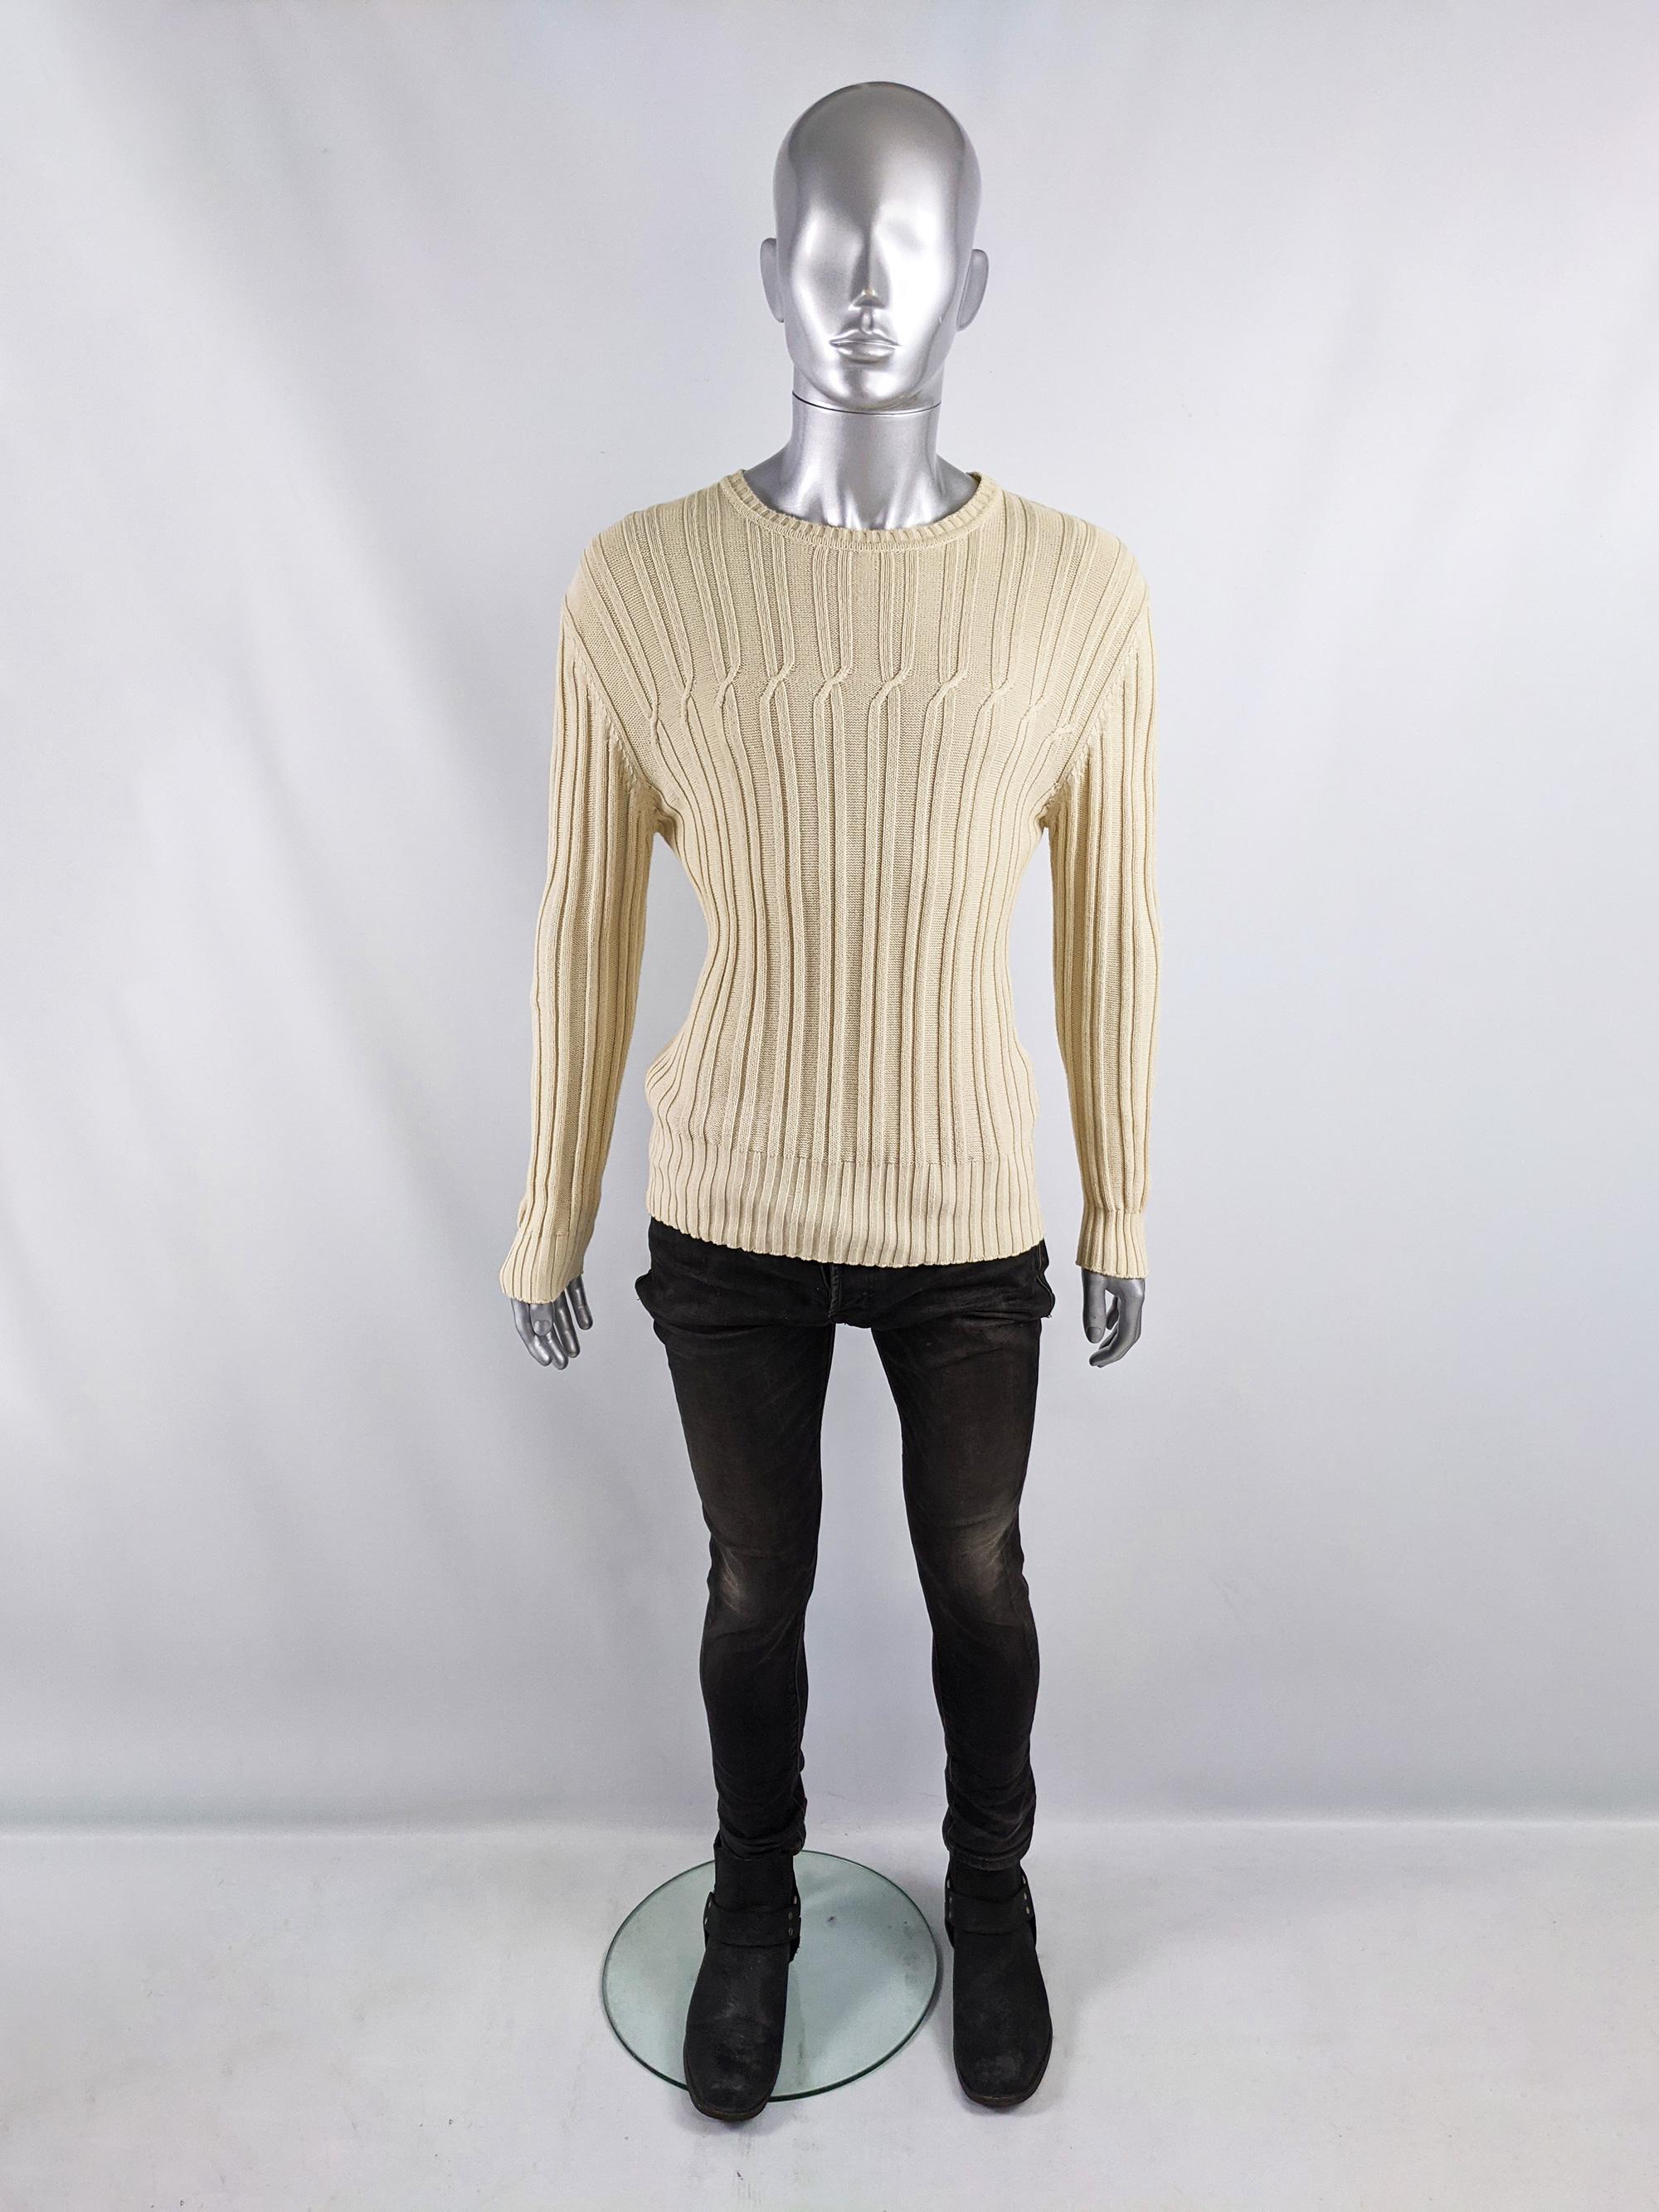 A stylish vintage mens jumper from the late 90s / early 2000s by luxury British fashion house, Joseph. Italian made, in a cream cotton knit fabric with a unique twisted / cable detail which gives a minimalist feel. 

Size: Marked EU 50 which roughly